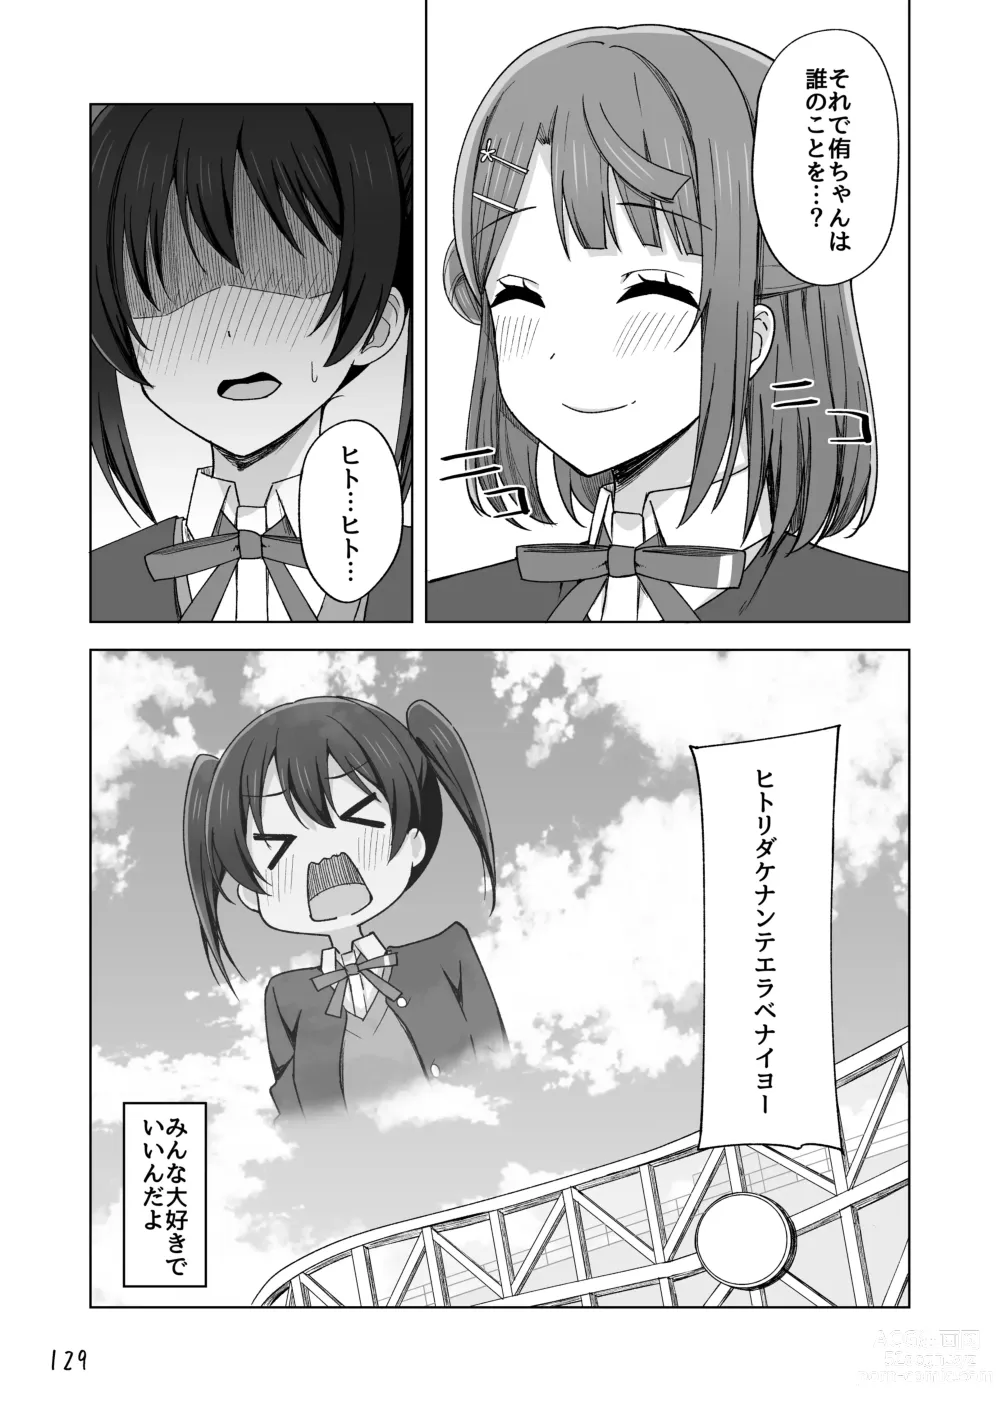 Page 133 of doujinshi Go for dream